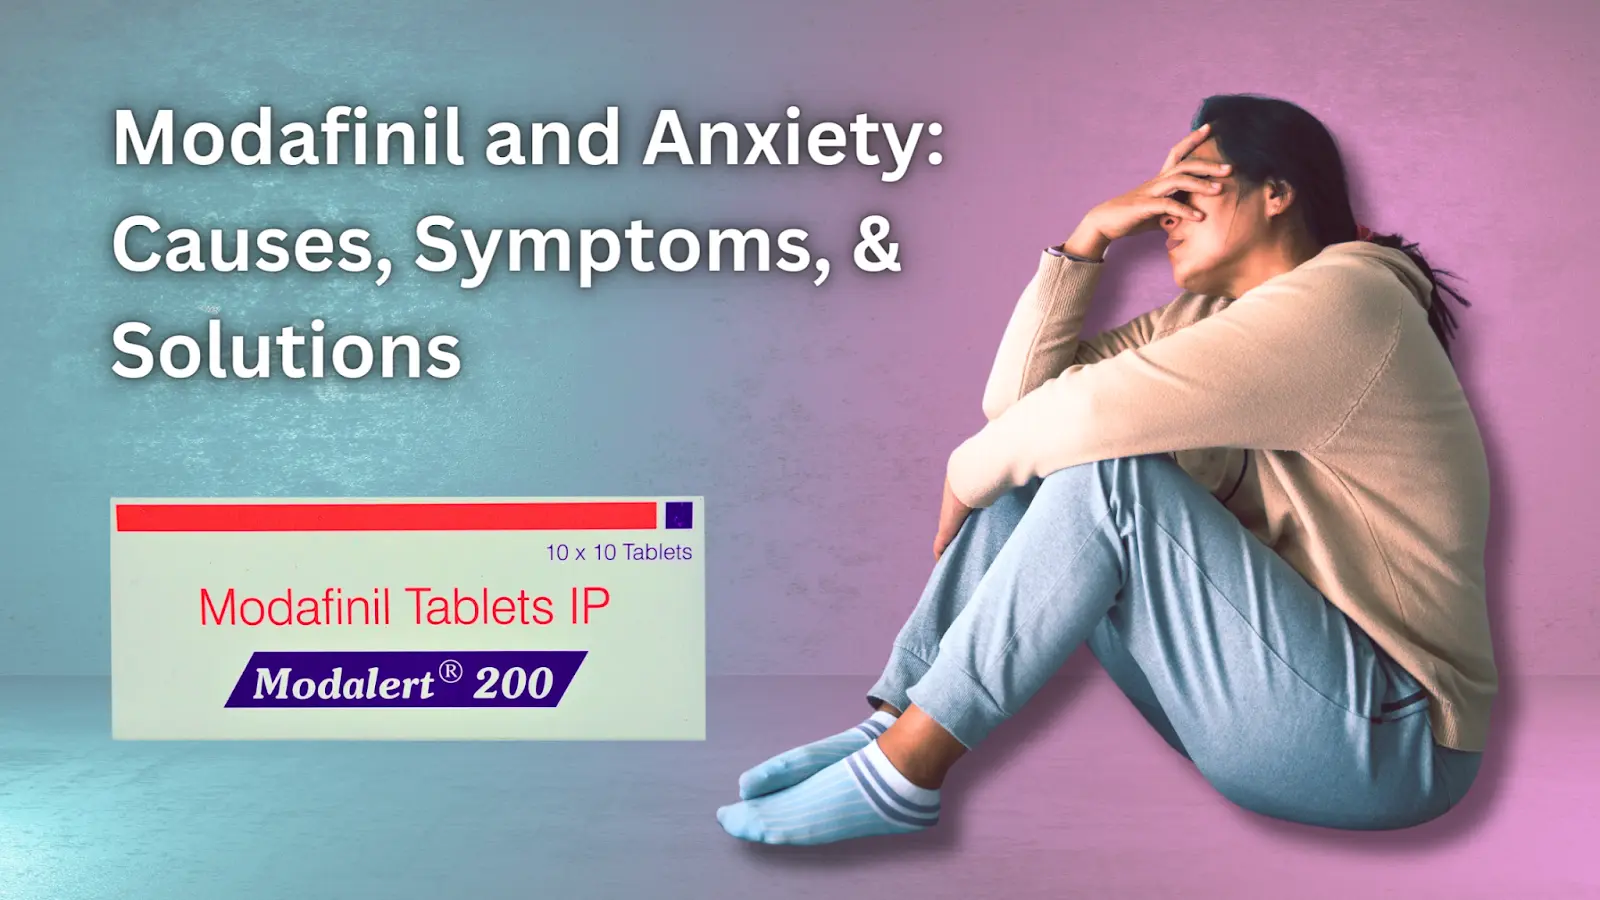 Modafinil and Anxiety: Causes, Symptoms, & Solutions